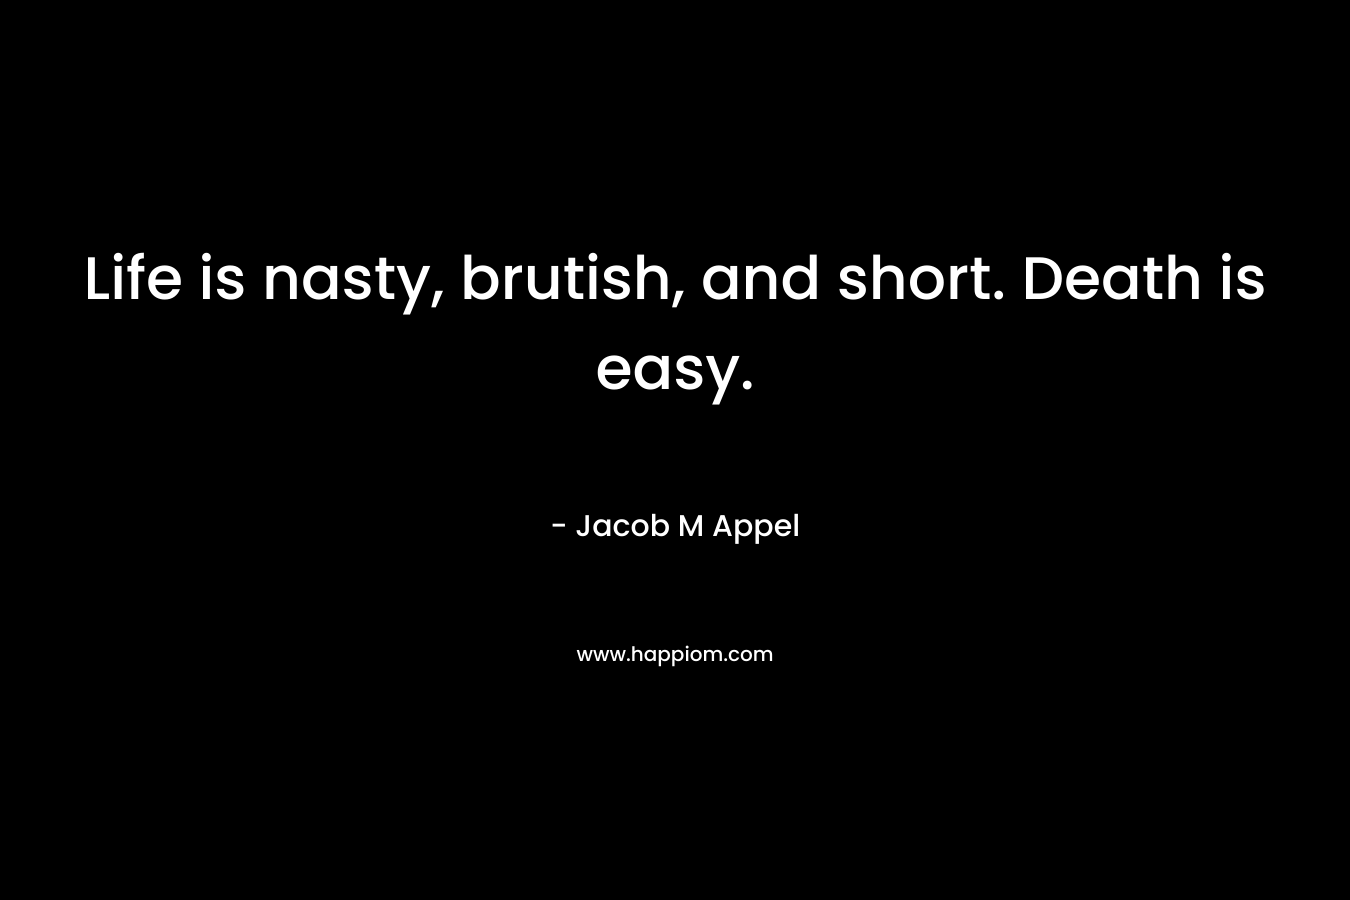 Life is nasty, brutish, and short. Death is easy. – Jacob M Appel